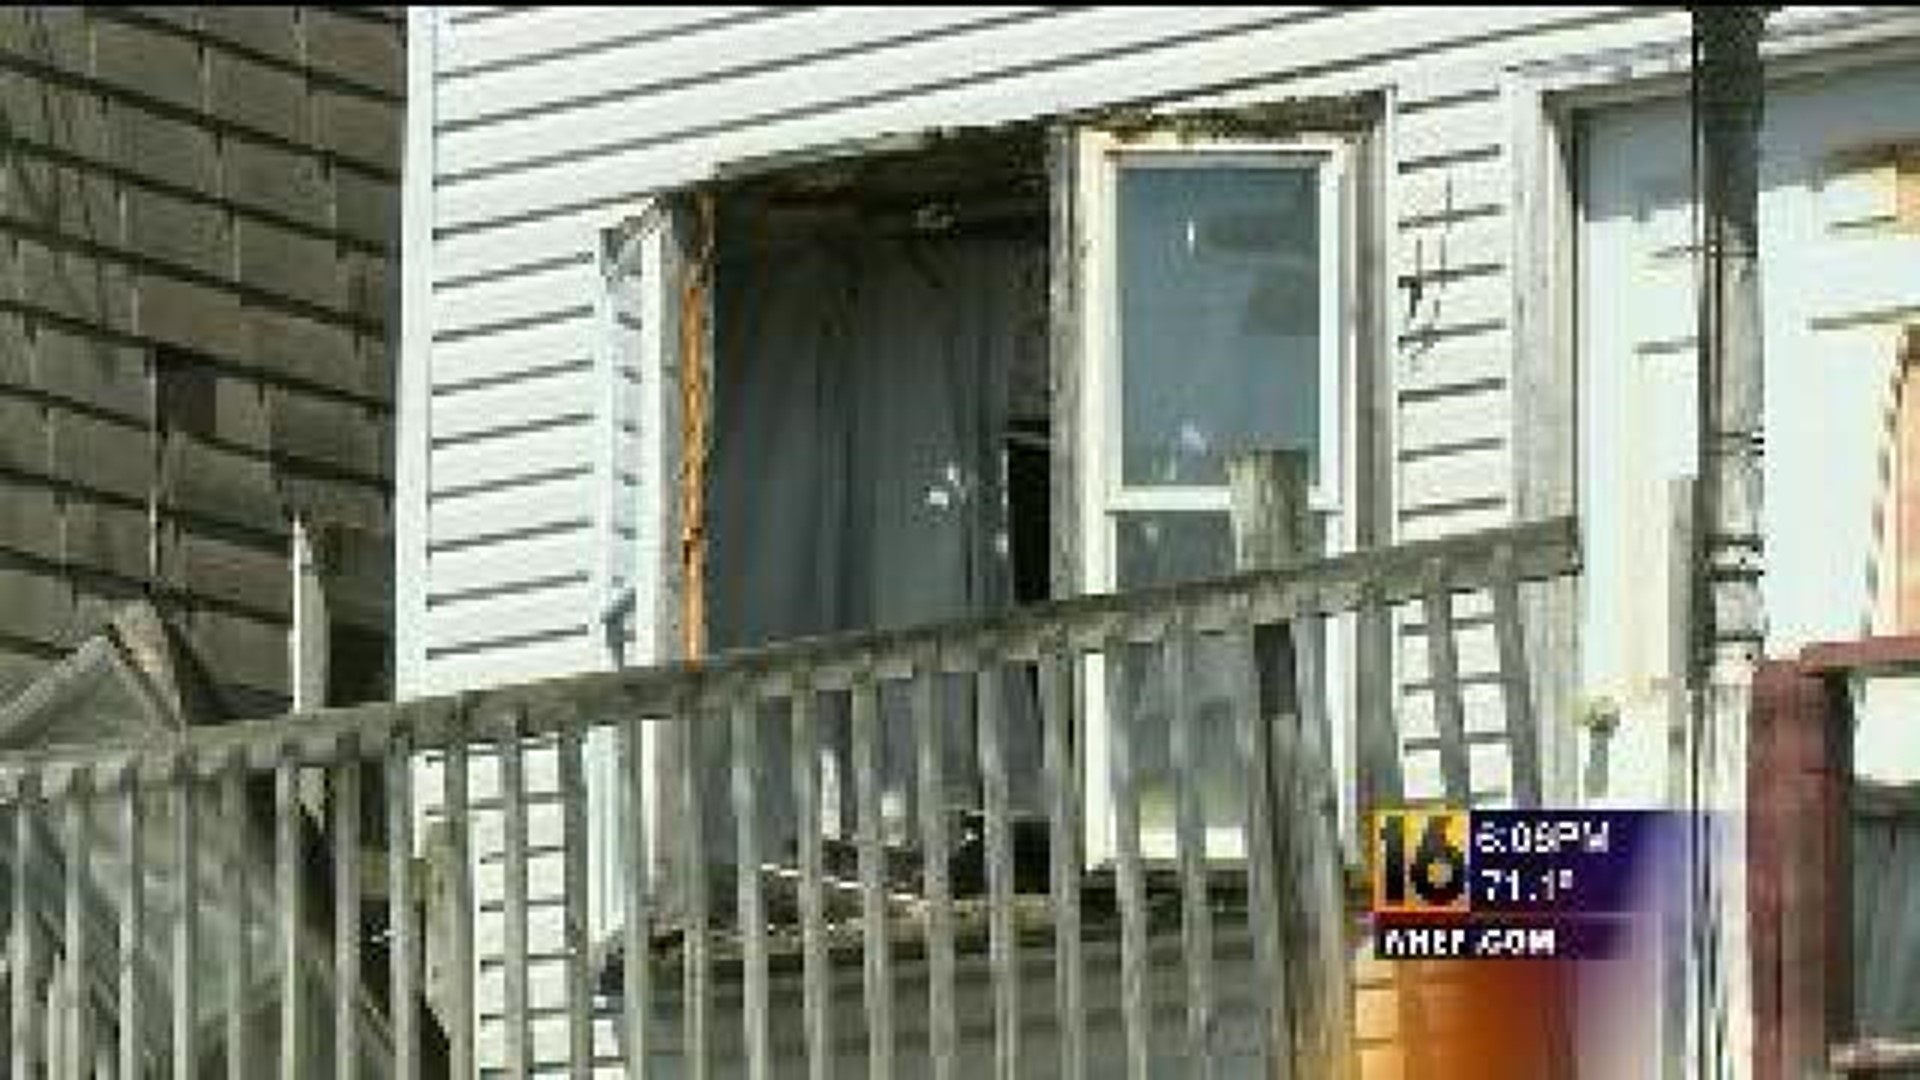 Suspicious Fires Have Neighbors Worried